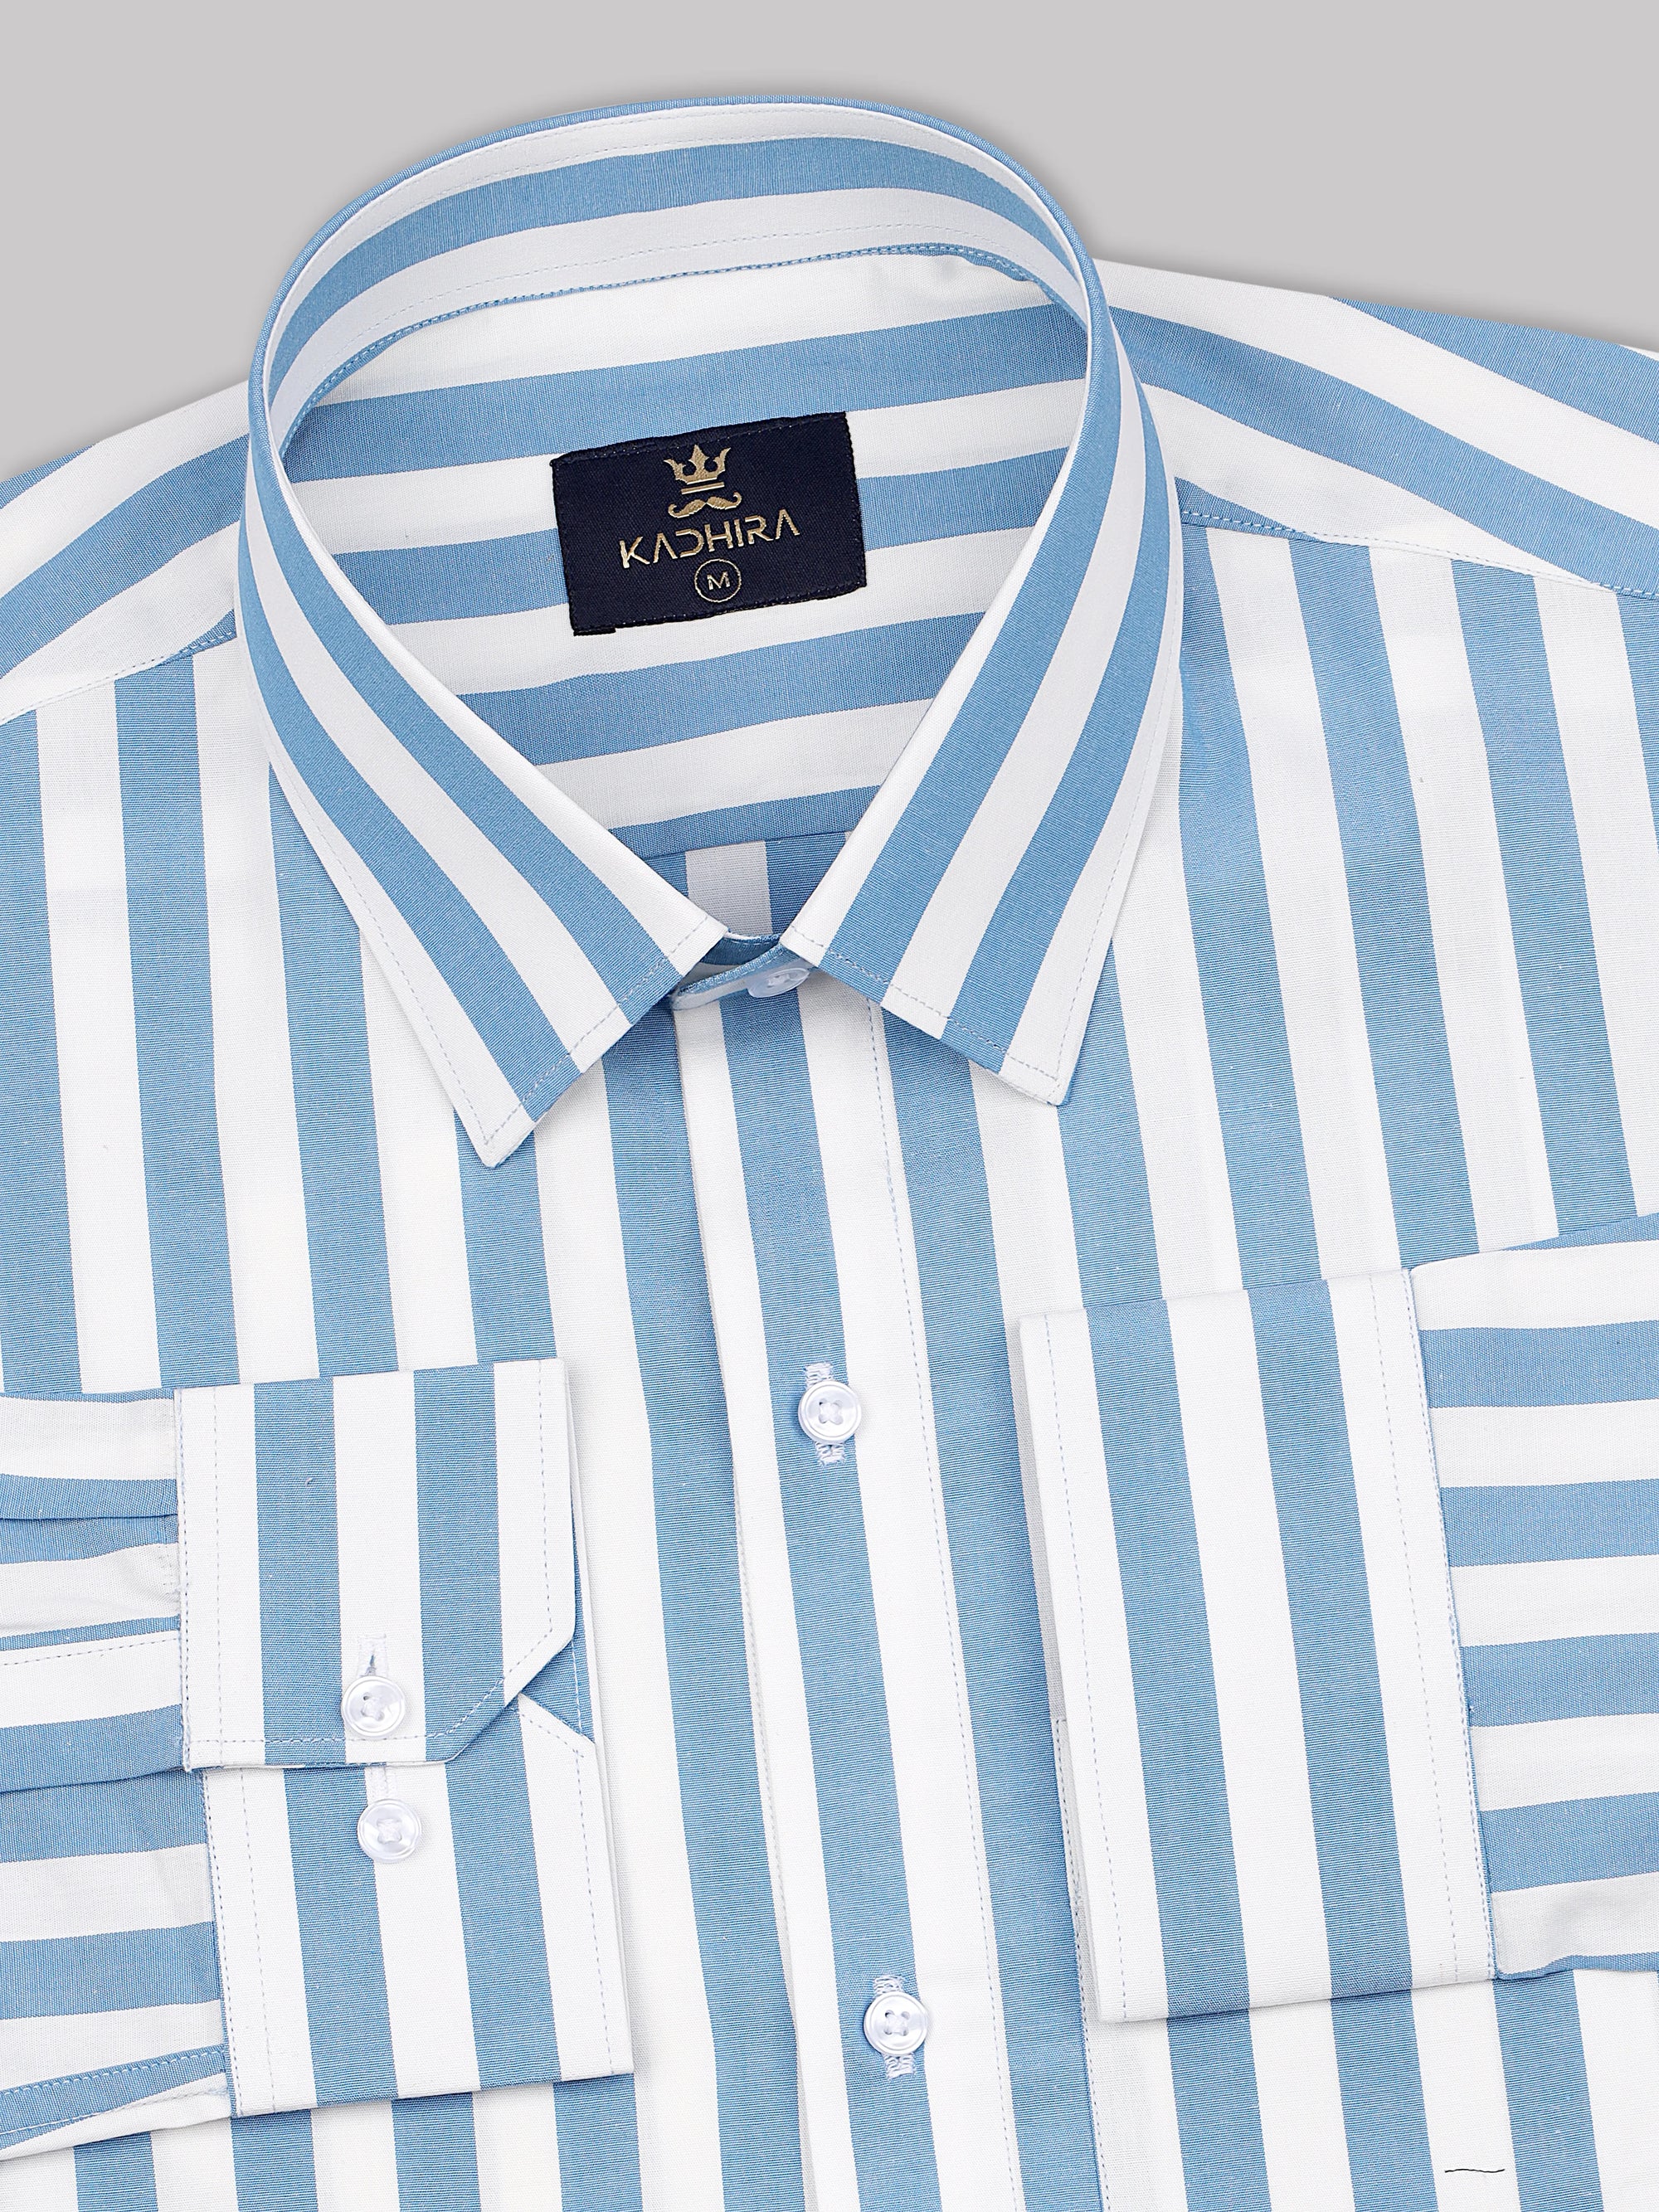 Ruddy Blue With White Awning Striped Premium Cotton Shirt